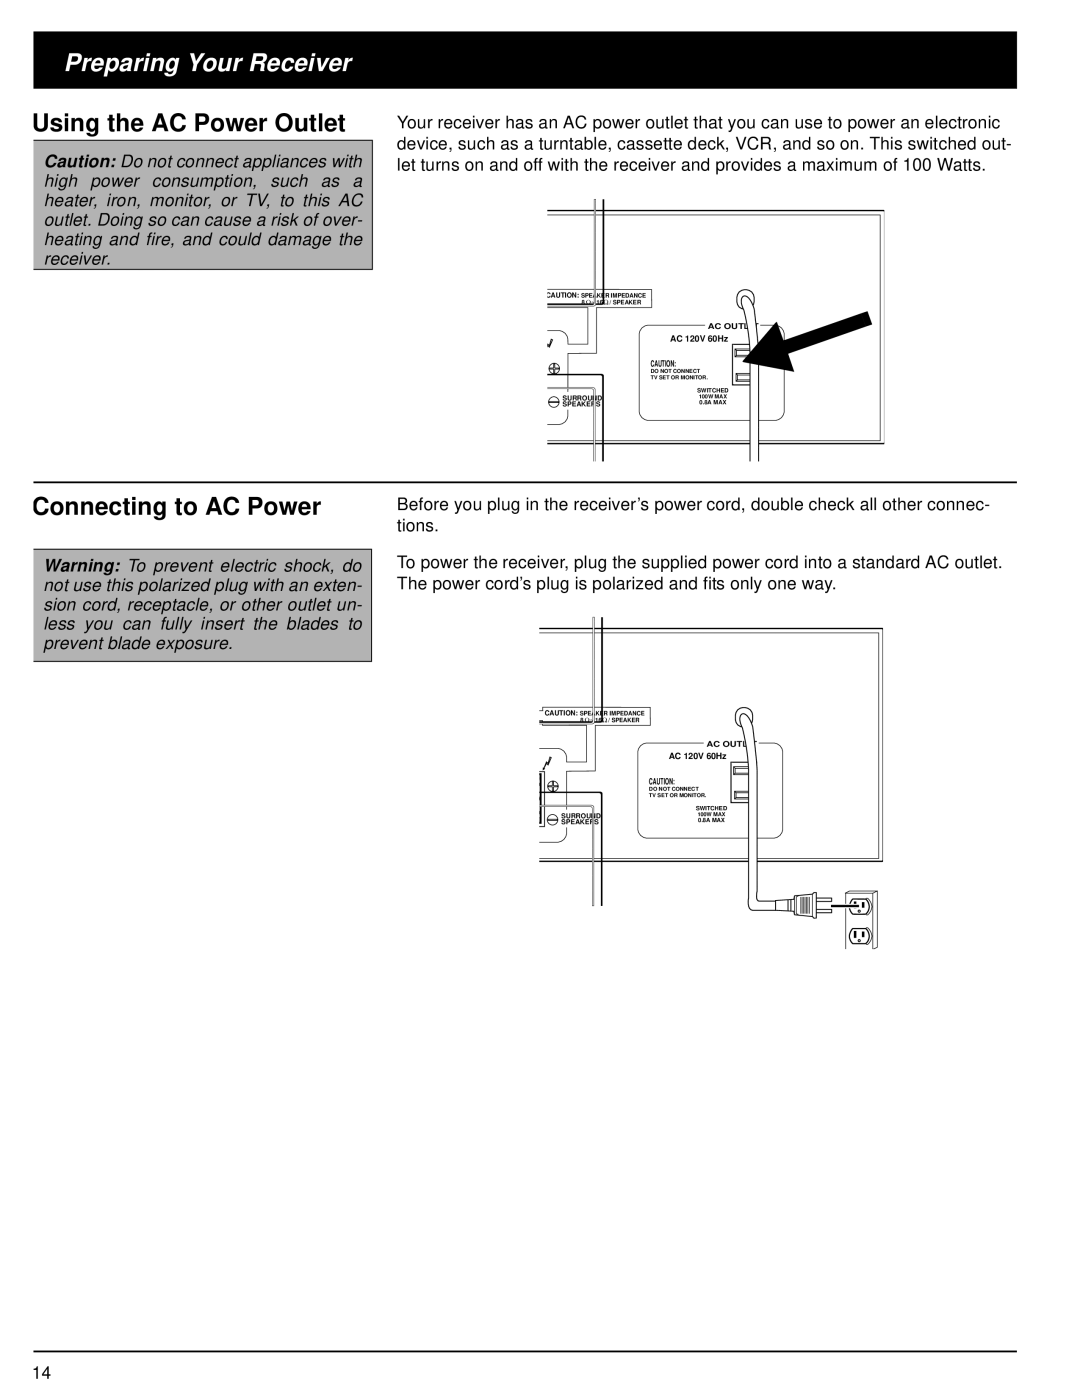 Panasonic STAV-3770 owner manual Using the AC Power Outlet, Connecting to AC Power, Preparing Your Receiver 